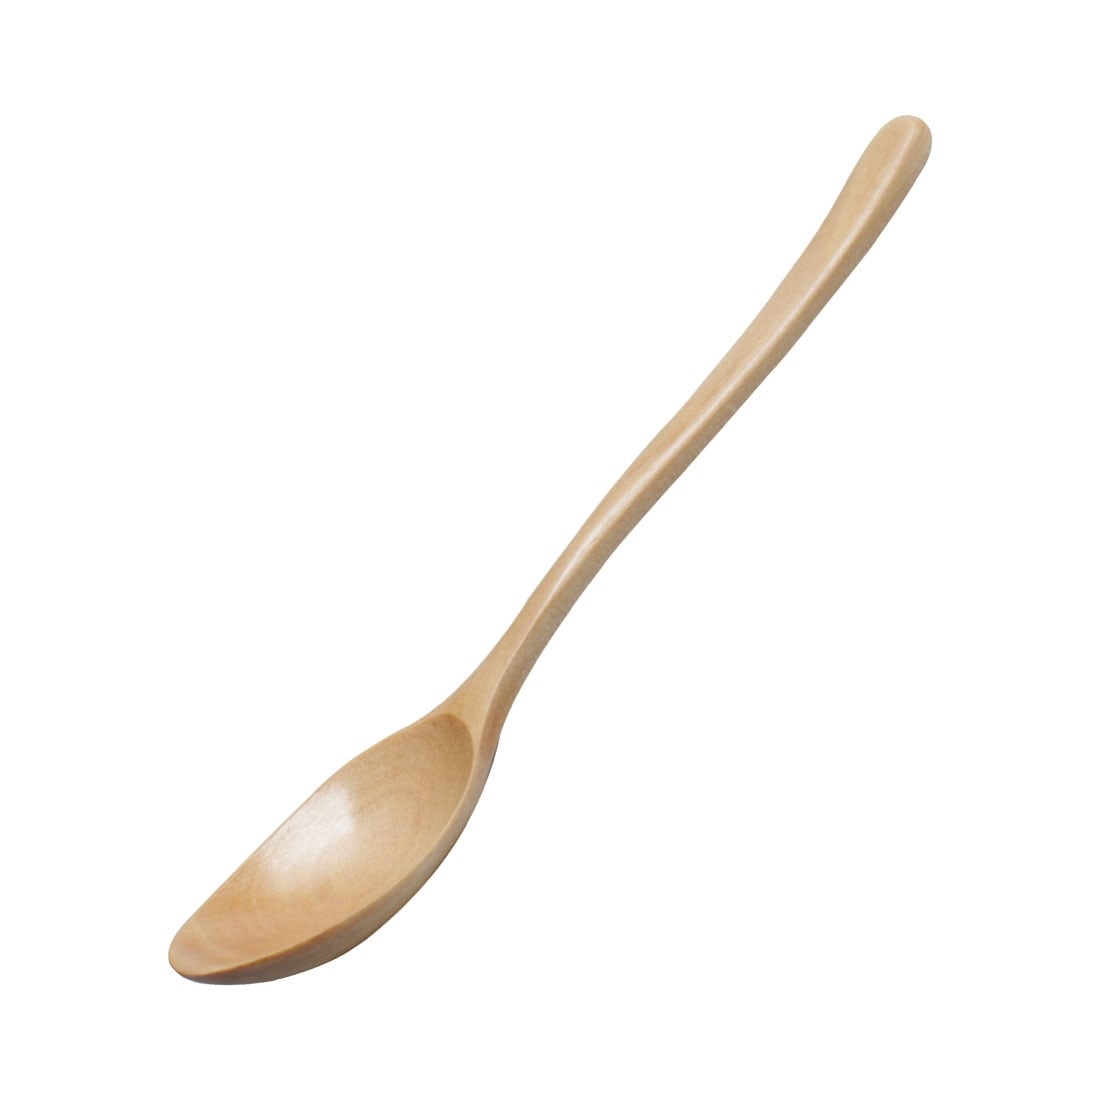 https://ak1.ostkcdn.com/images/products/is/images/direct/d29fb6ed6658e761f86d28fee58fb2f70c4abcf4/7.1%22-Wooden-Spoons-Wood-Soup-Spoons-for-Eating-Mixing-Stirring-Cooking.jpg